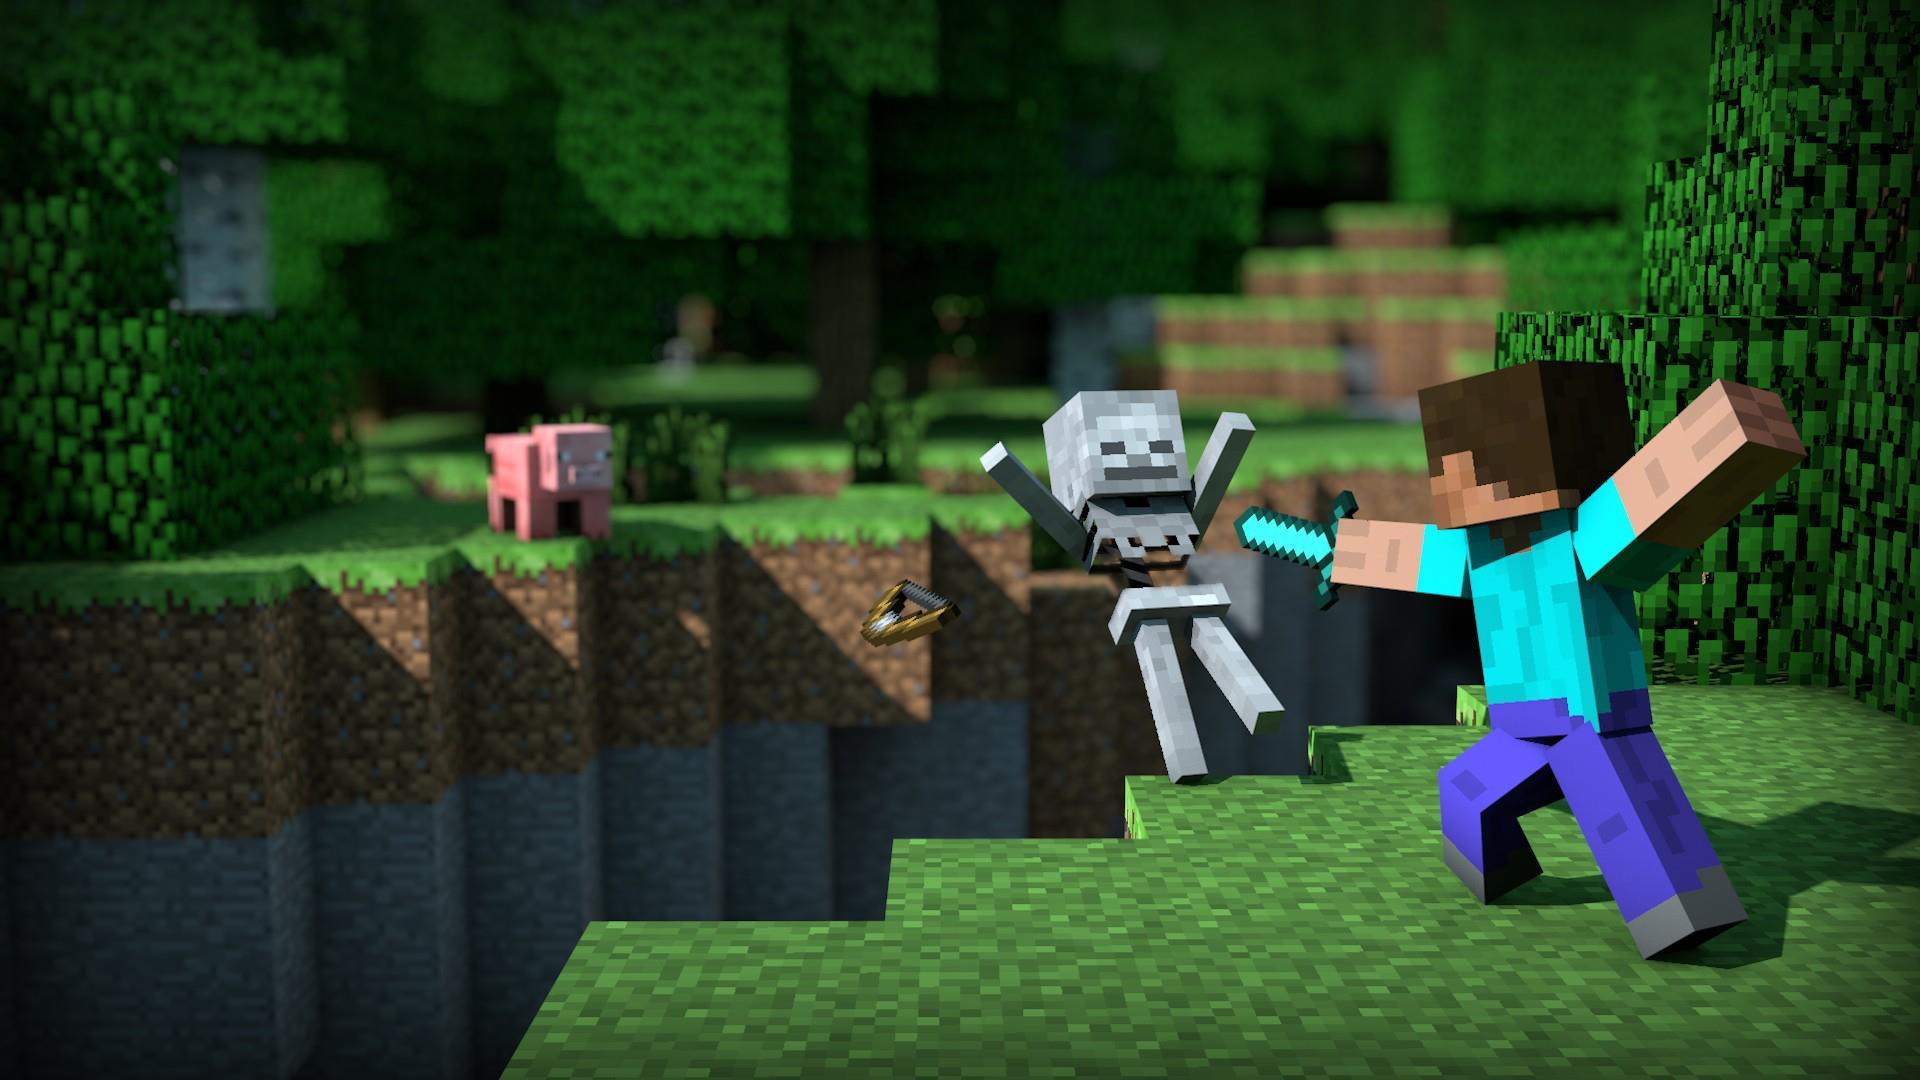 Game On! Minecraft: Bedrock Takes Chromebooks By Storm